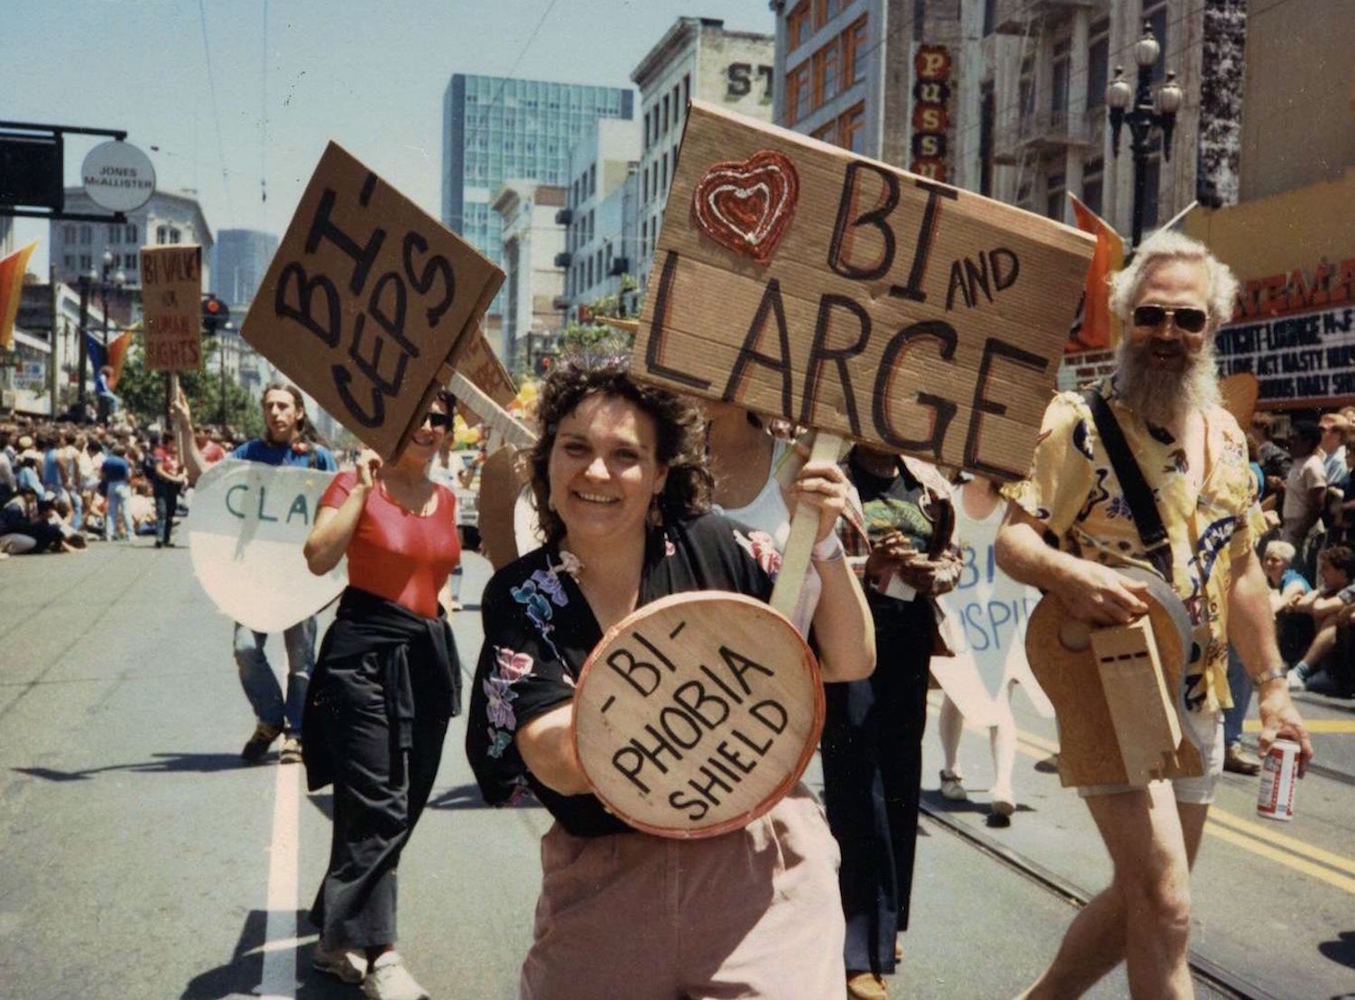 Lani marching in the 1984 San Francisco Lesbian and Gay Pride Parade; BiPOL’s contingent was led by a red convertible with Mayor “Bi-anne Feinstein” and “Princess Bi” — BiPOL won Most Outrageous Contingent. Photo credit: Arlene Krantz.